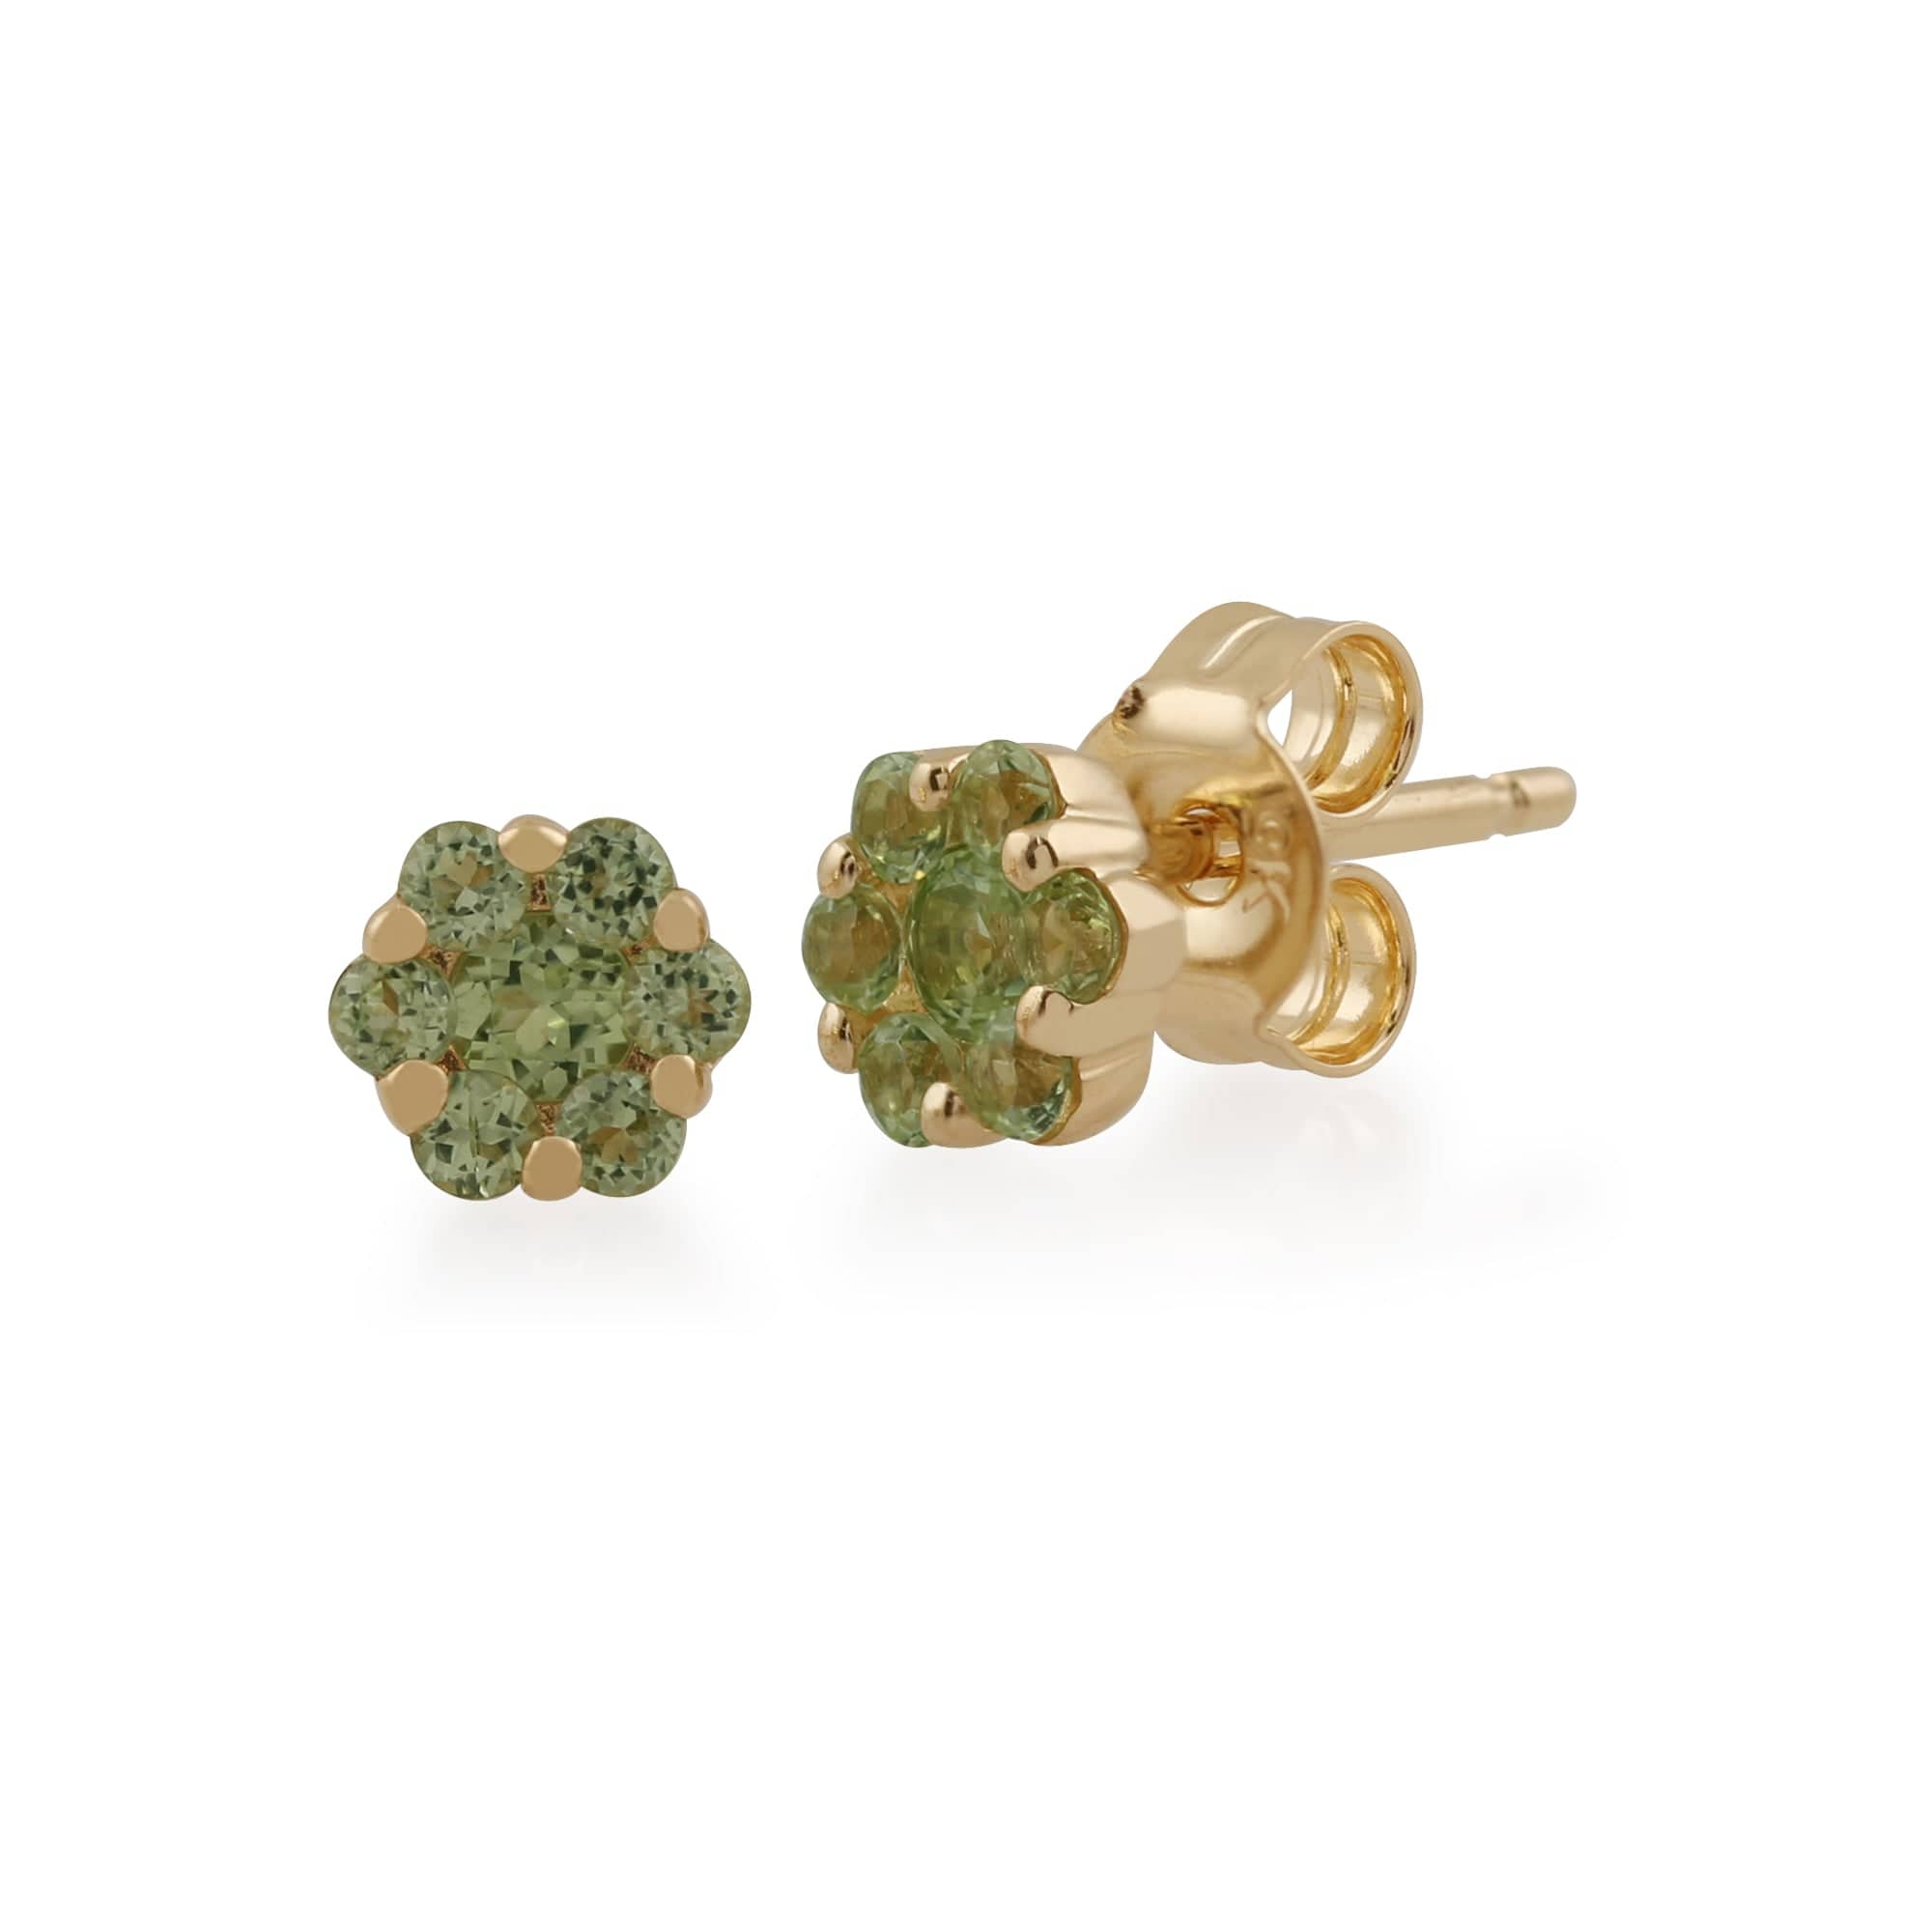 Floral Round Peridot Cluster Stud Earrings in 9ct Yellow Gold - Gemondo